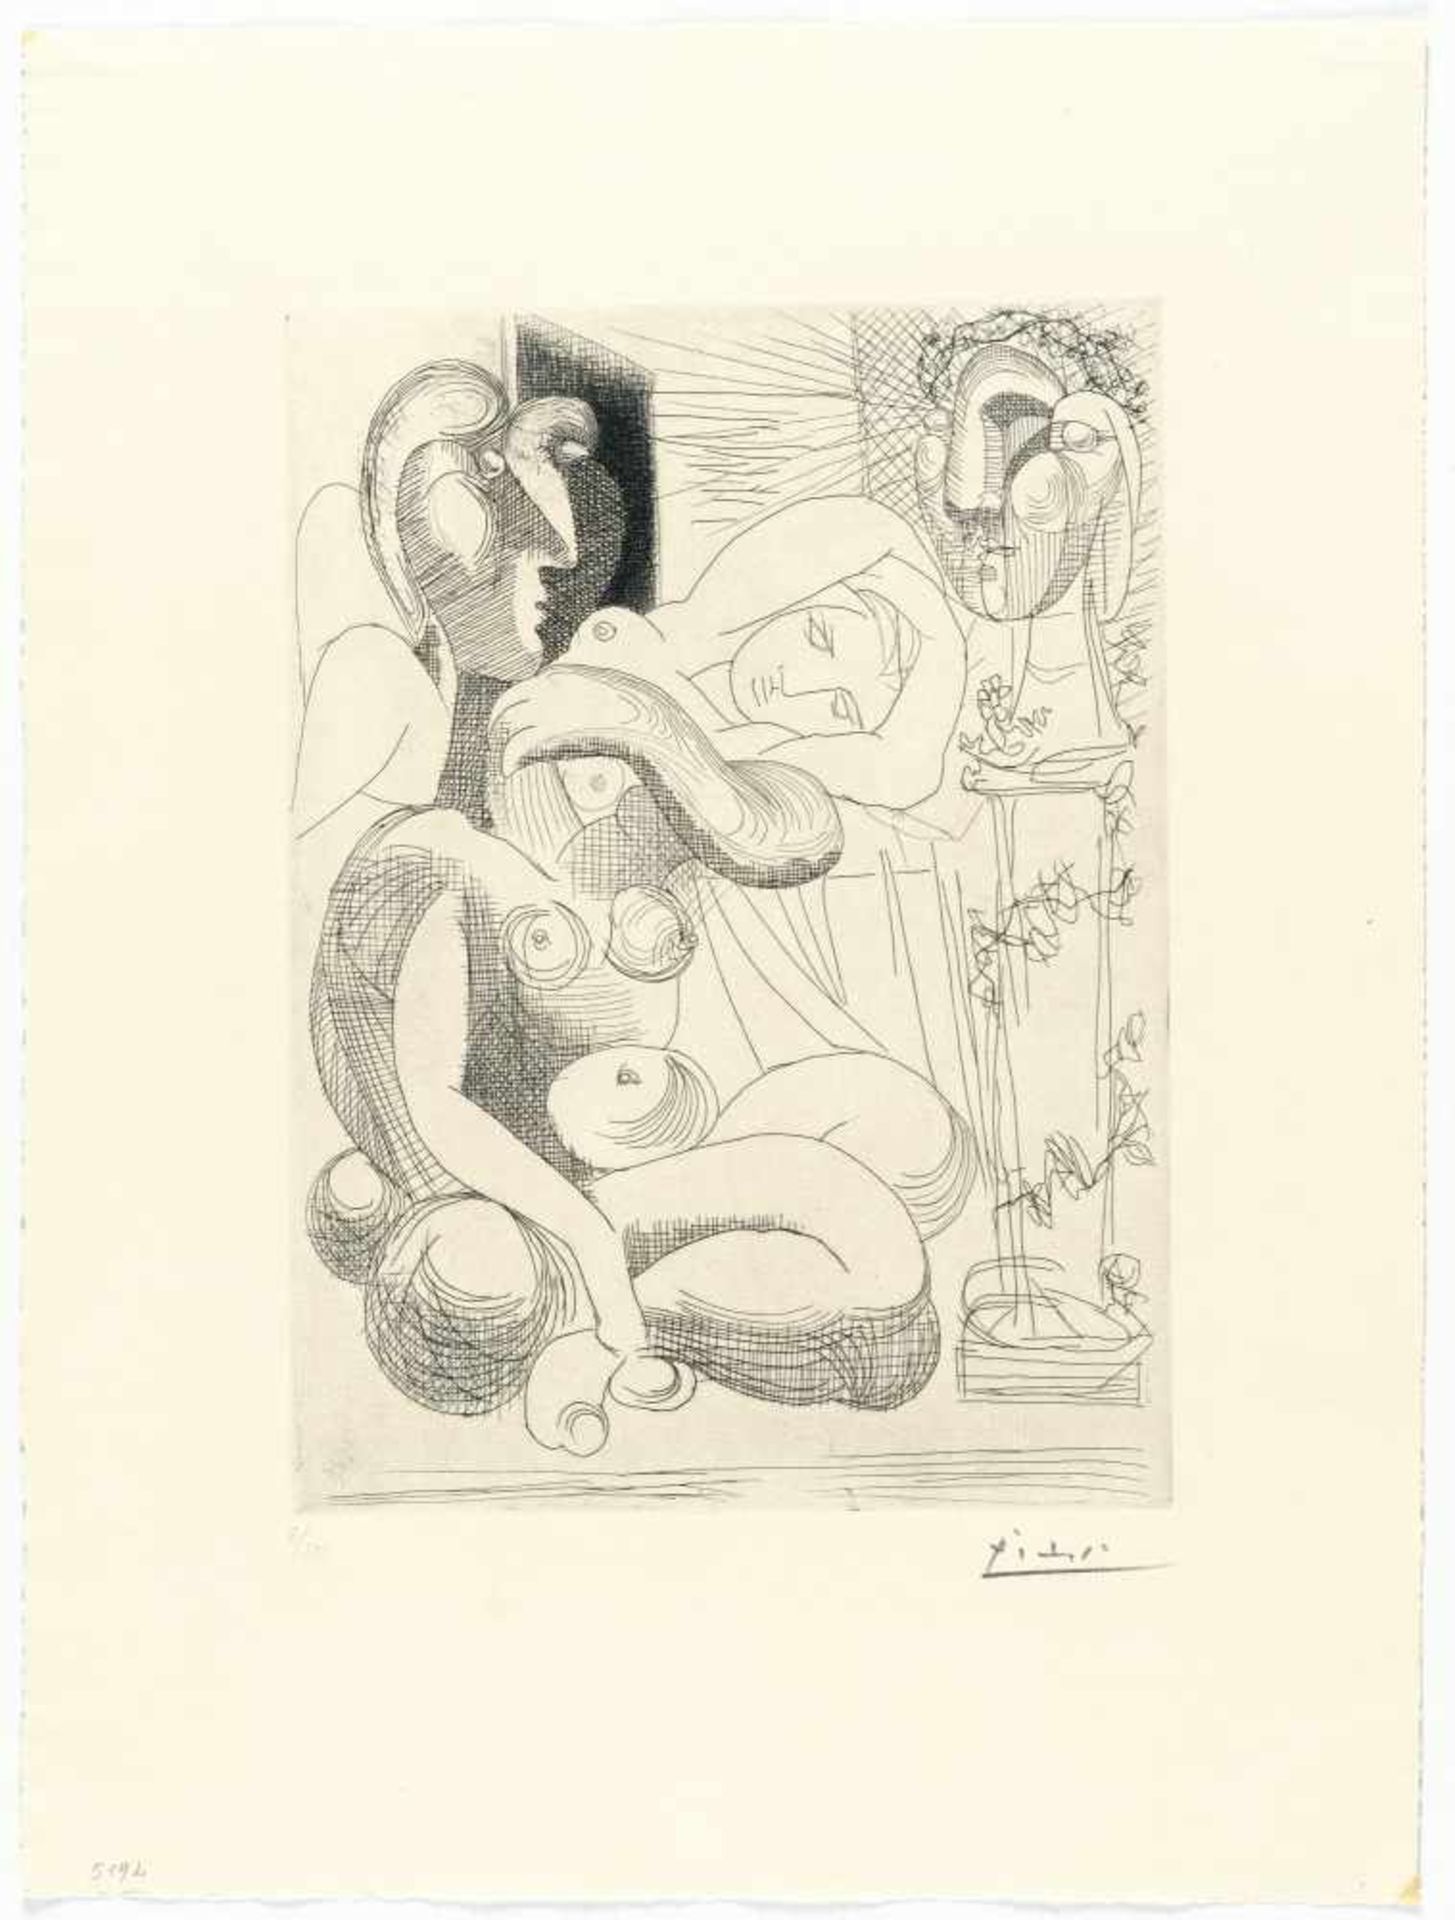 Pablo Picasso - Image 2 of 3